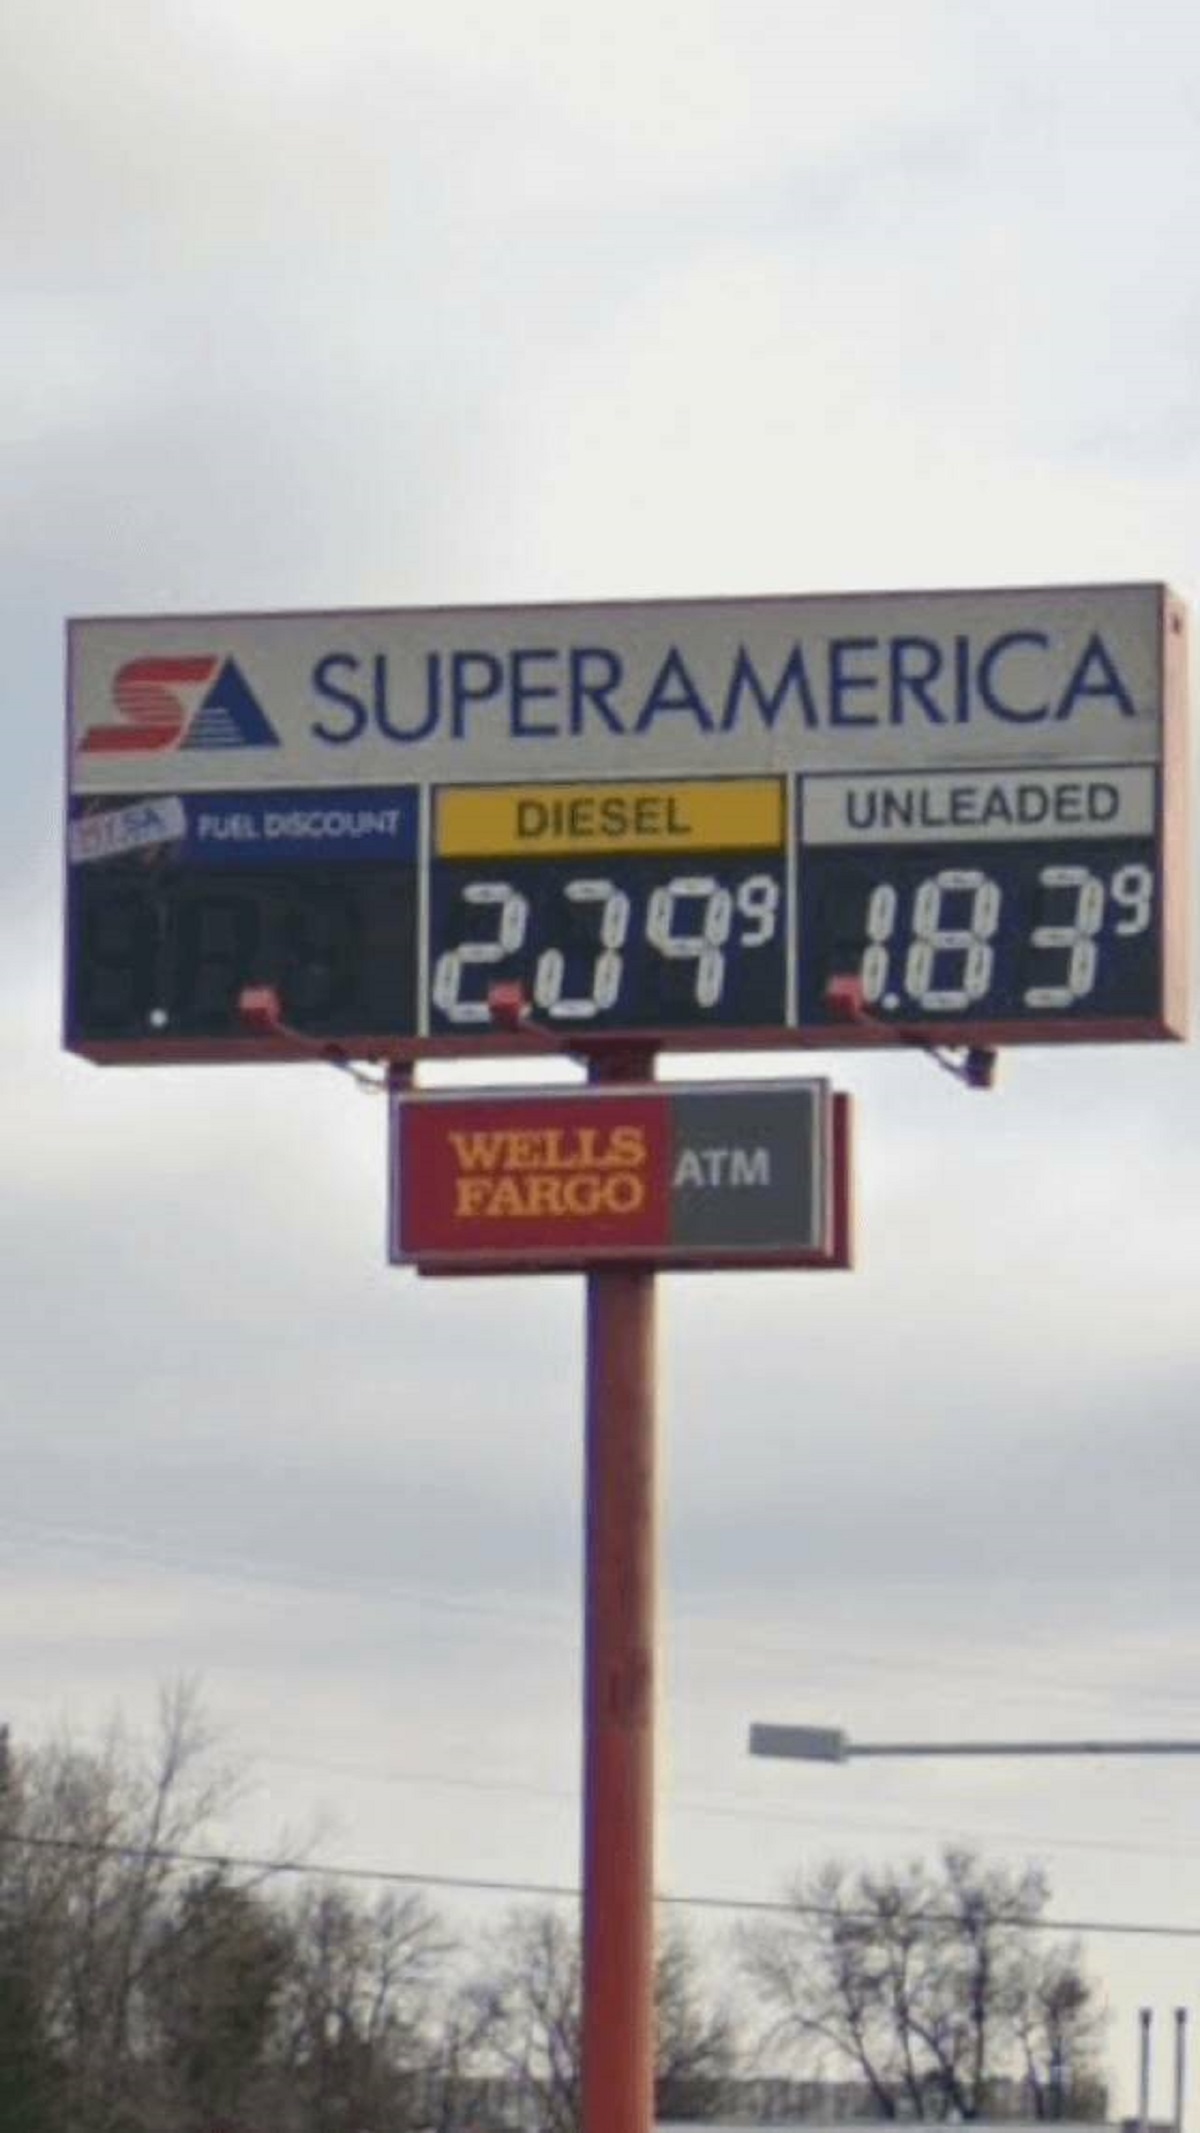 "This gas station near me closed in 2020 but left their prices up."